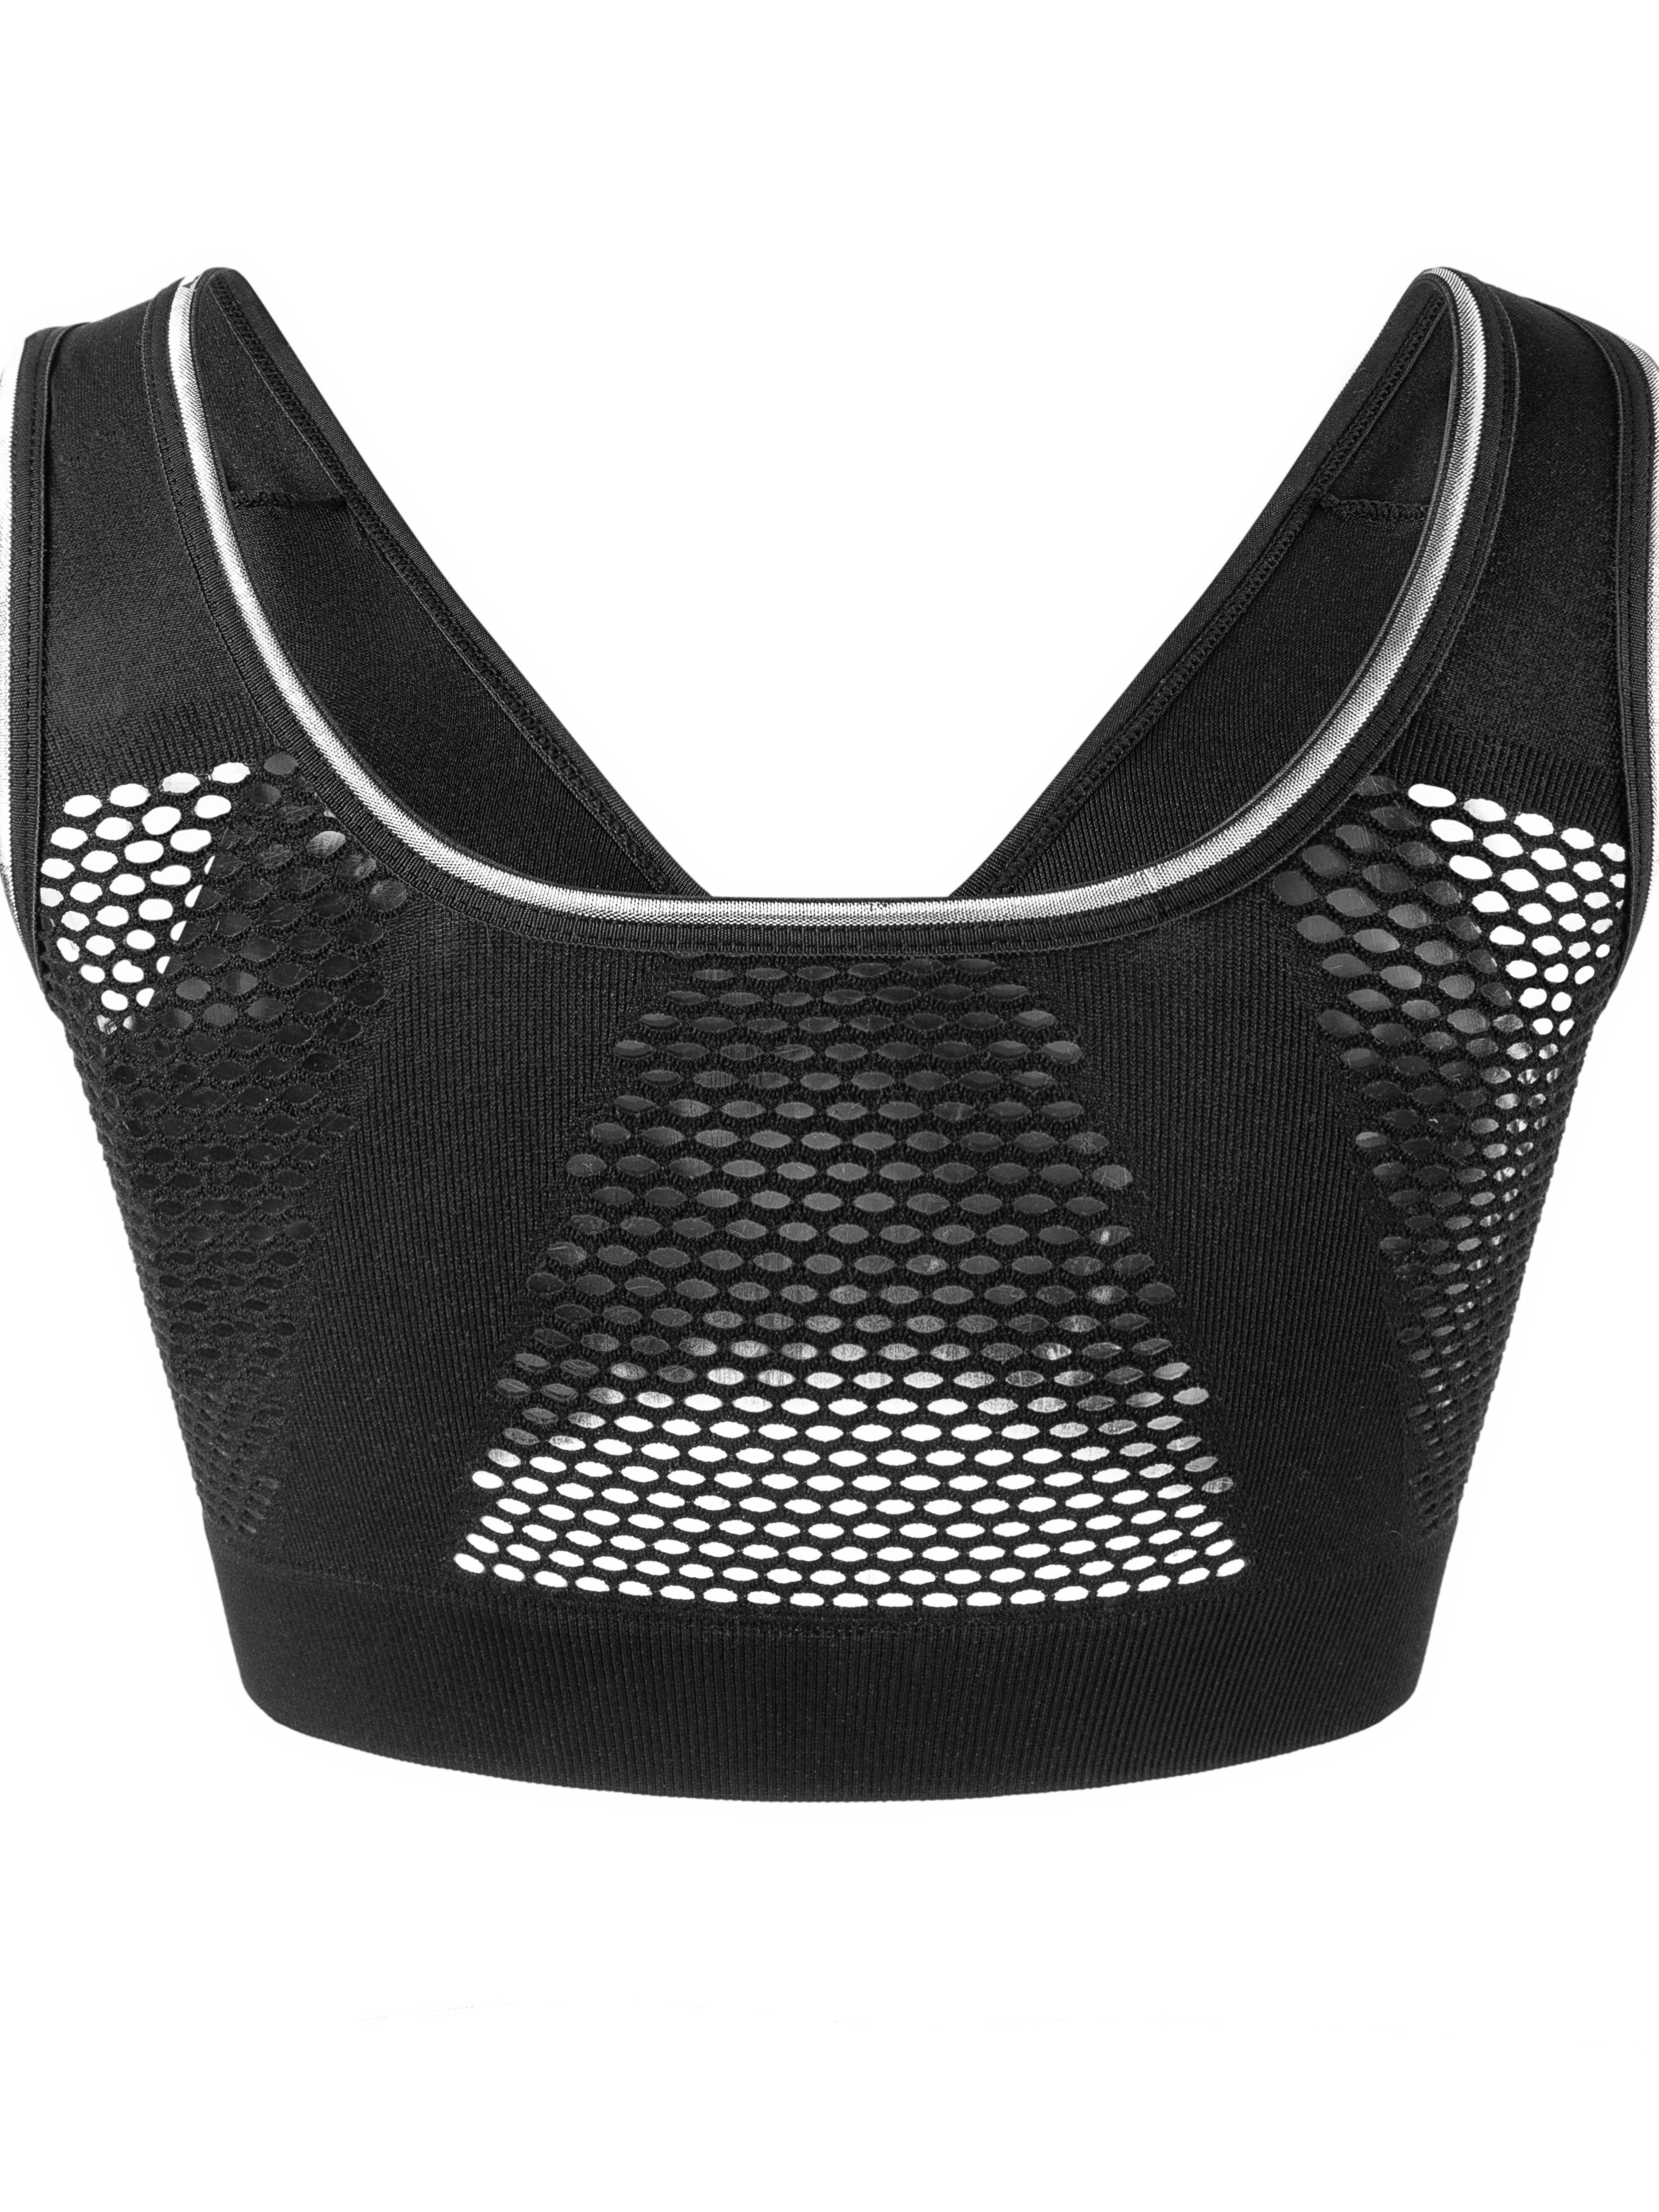 Plus Size Women's Yoga Running Sports Bra, Wireless, Hollow Out Mesh  Fabric, Breathable